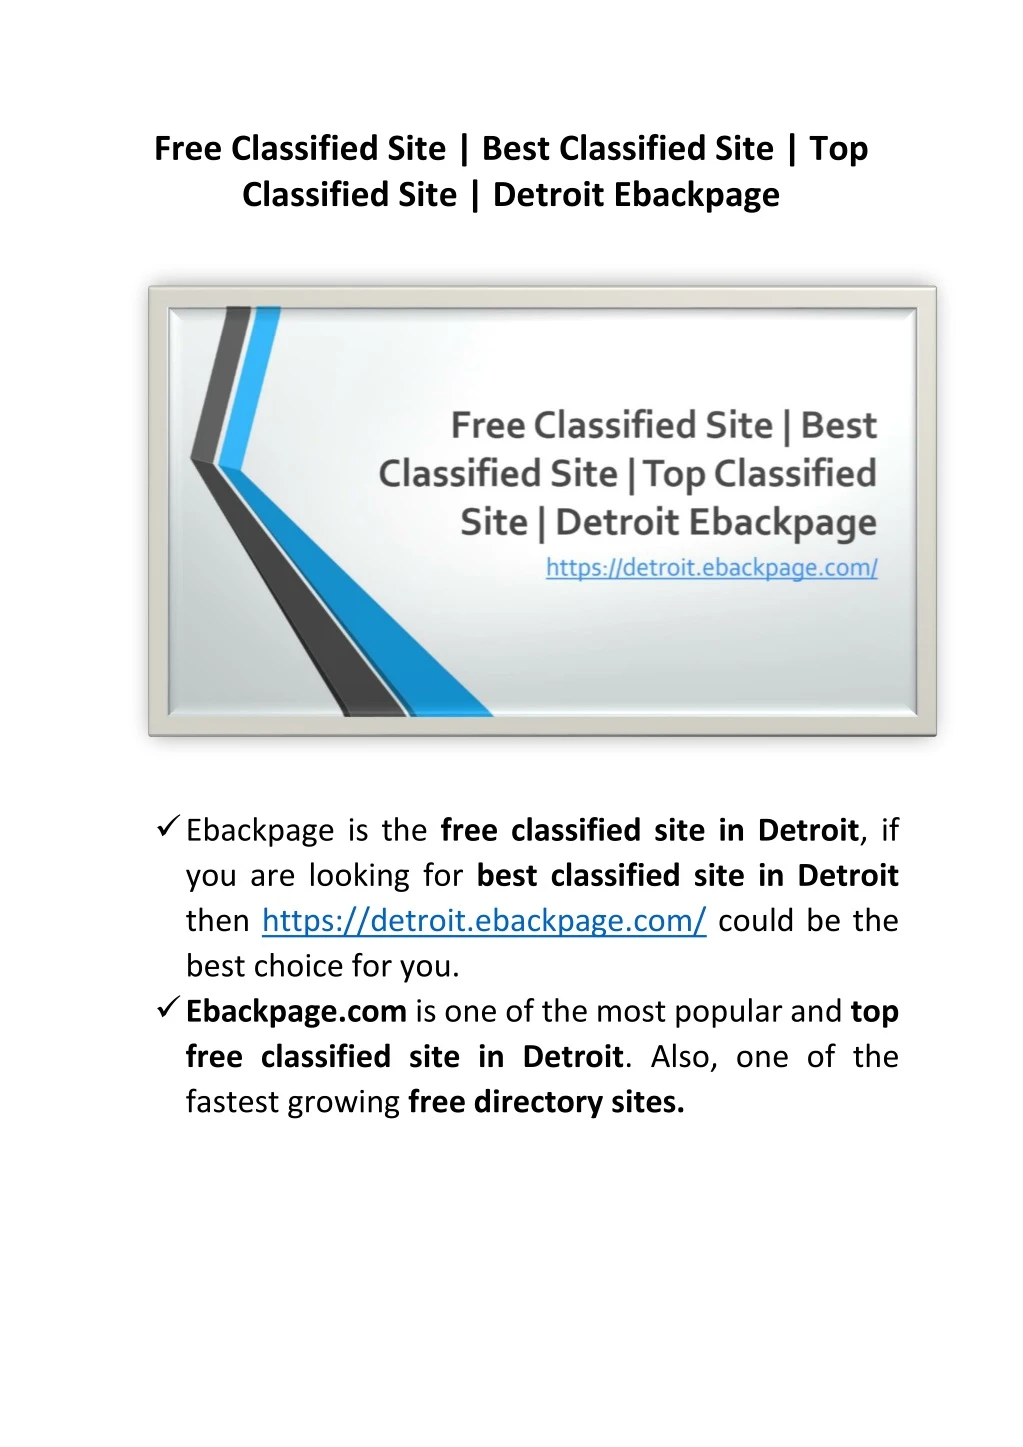 free classified site best classified site